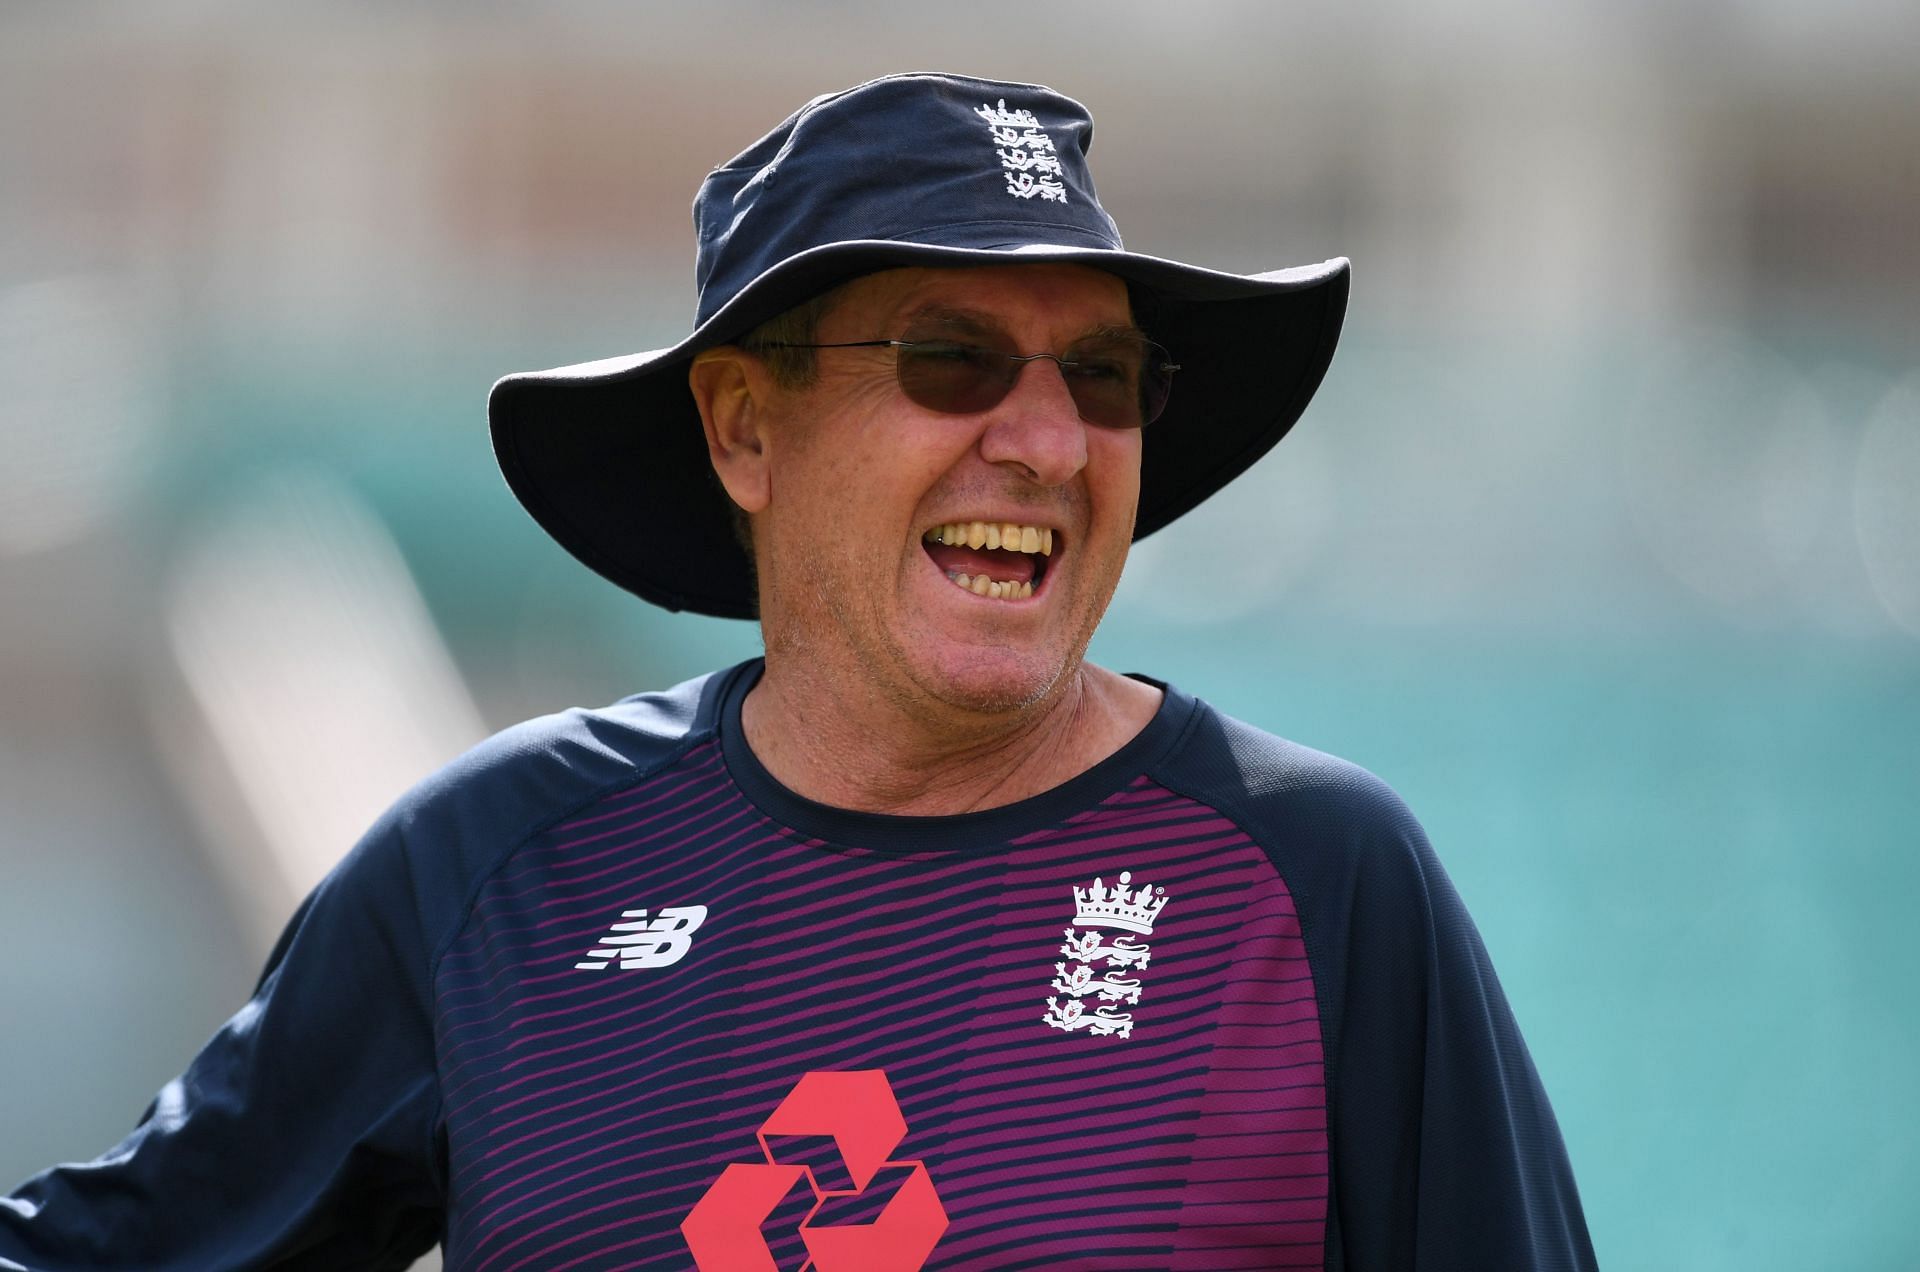 Trevor Bayliss has previously coached the SRH and KKR. (Image Credits: Getty)